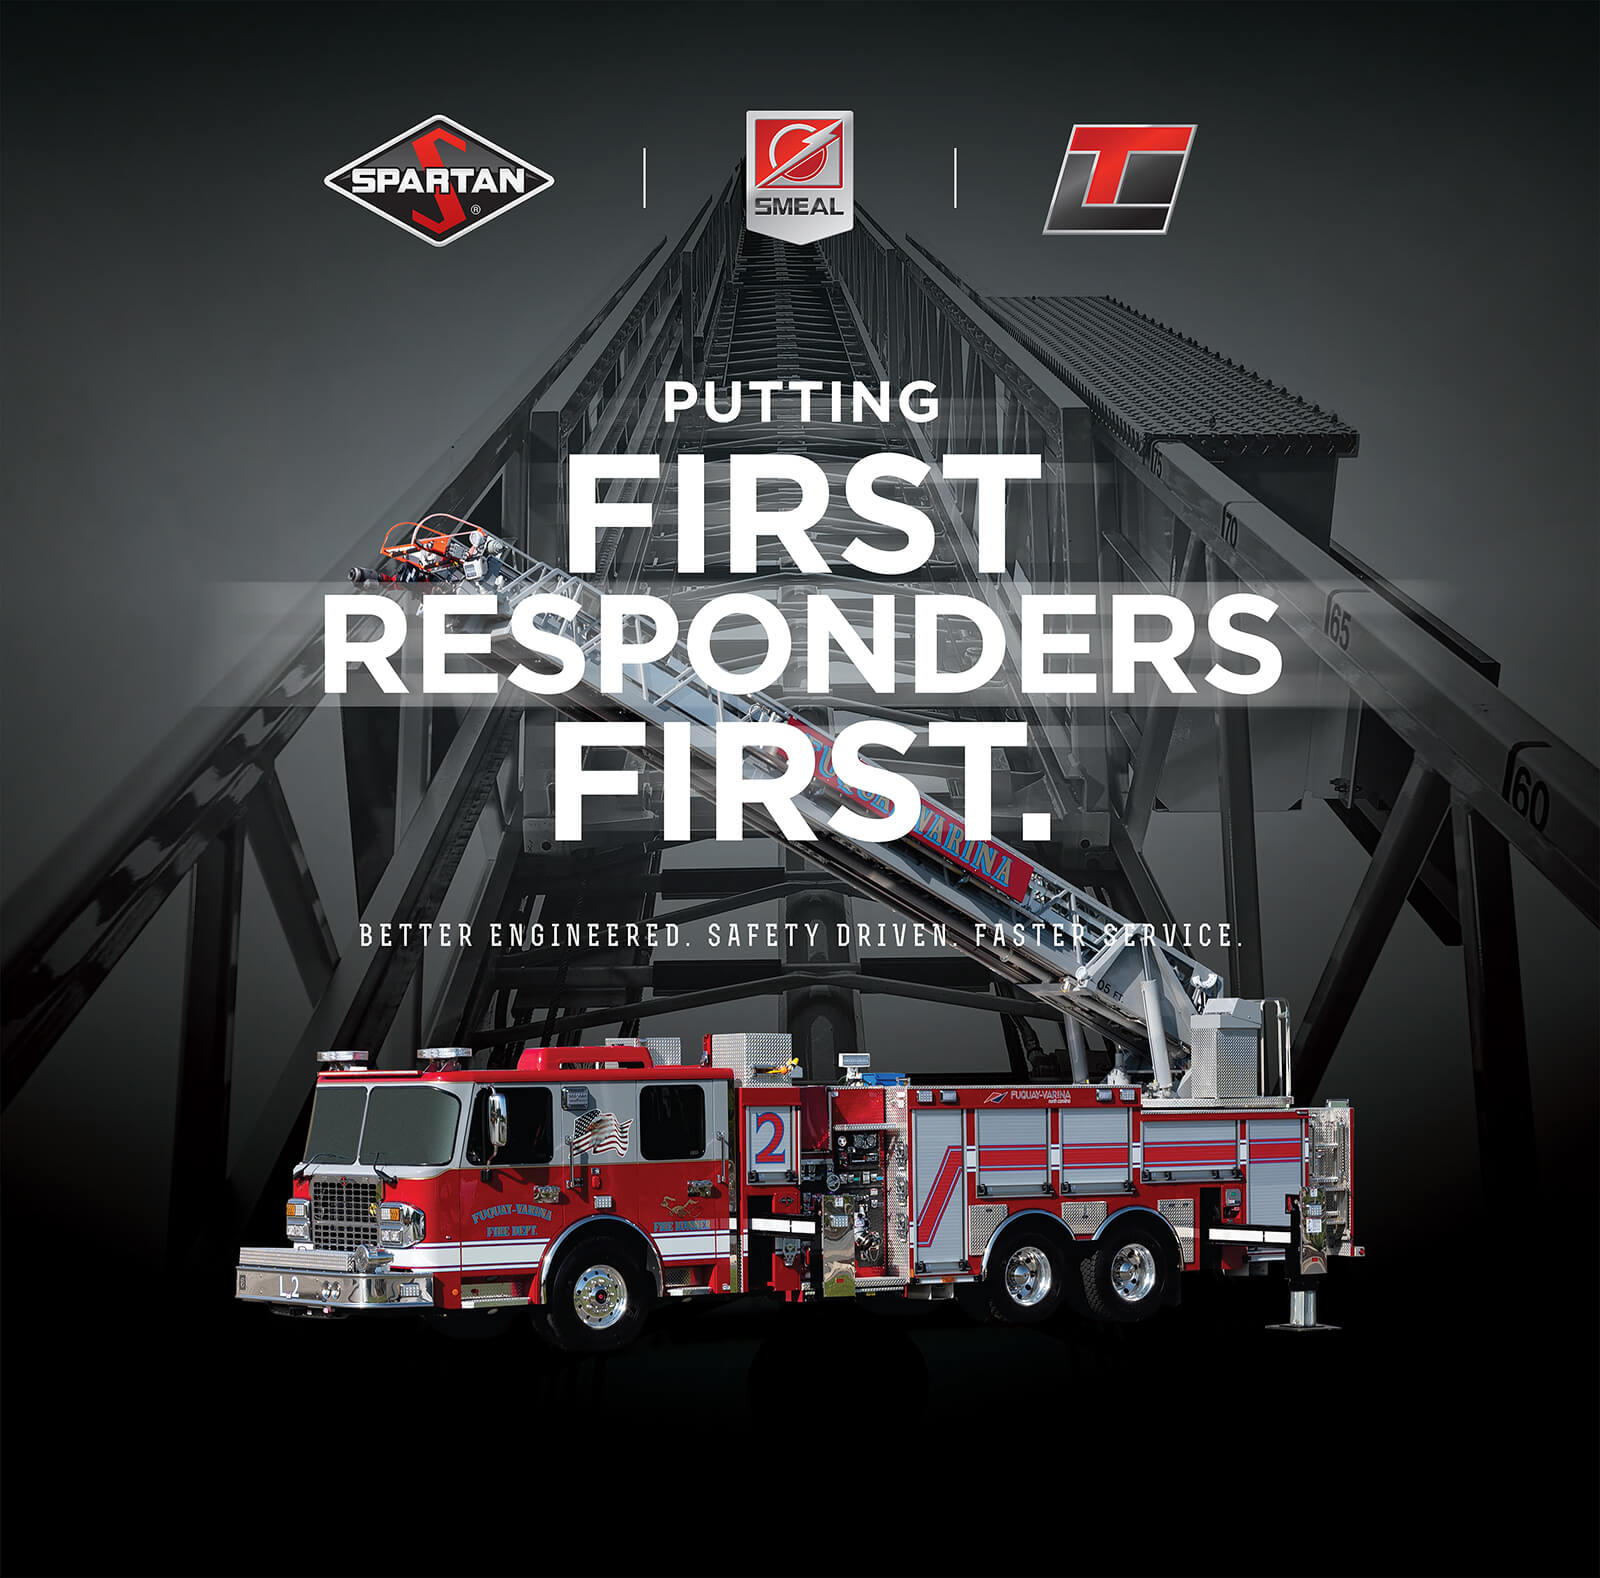 Designed graphic with Spartan, Smeal and Ladder Tower logos, image of a Spartan Fire Truck and copy that says - Putting First Responders First. Better Engineered. Safety Drive. Faster Service